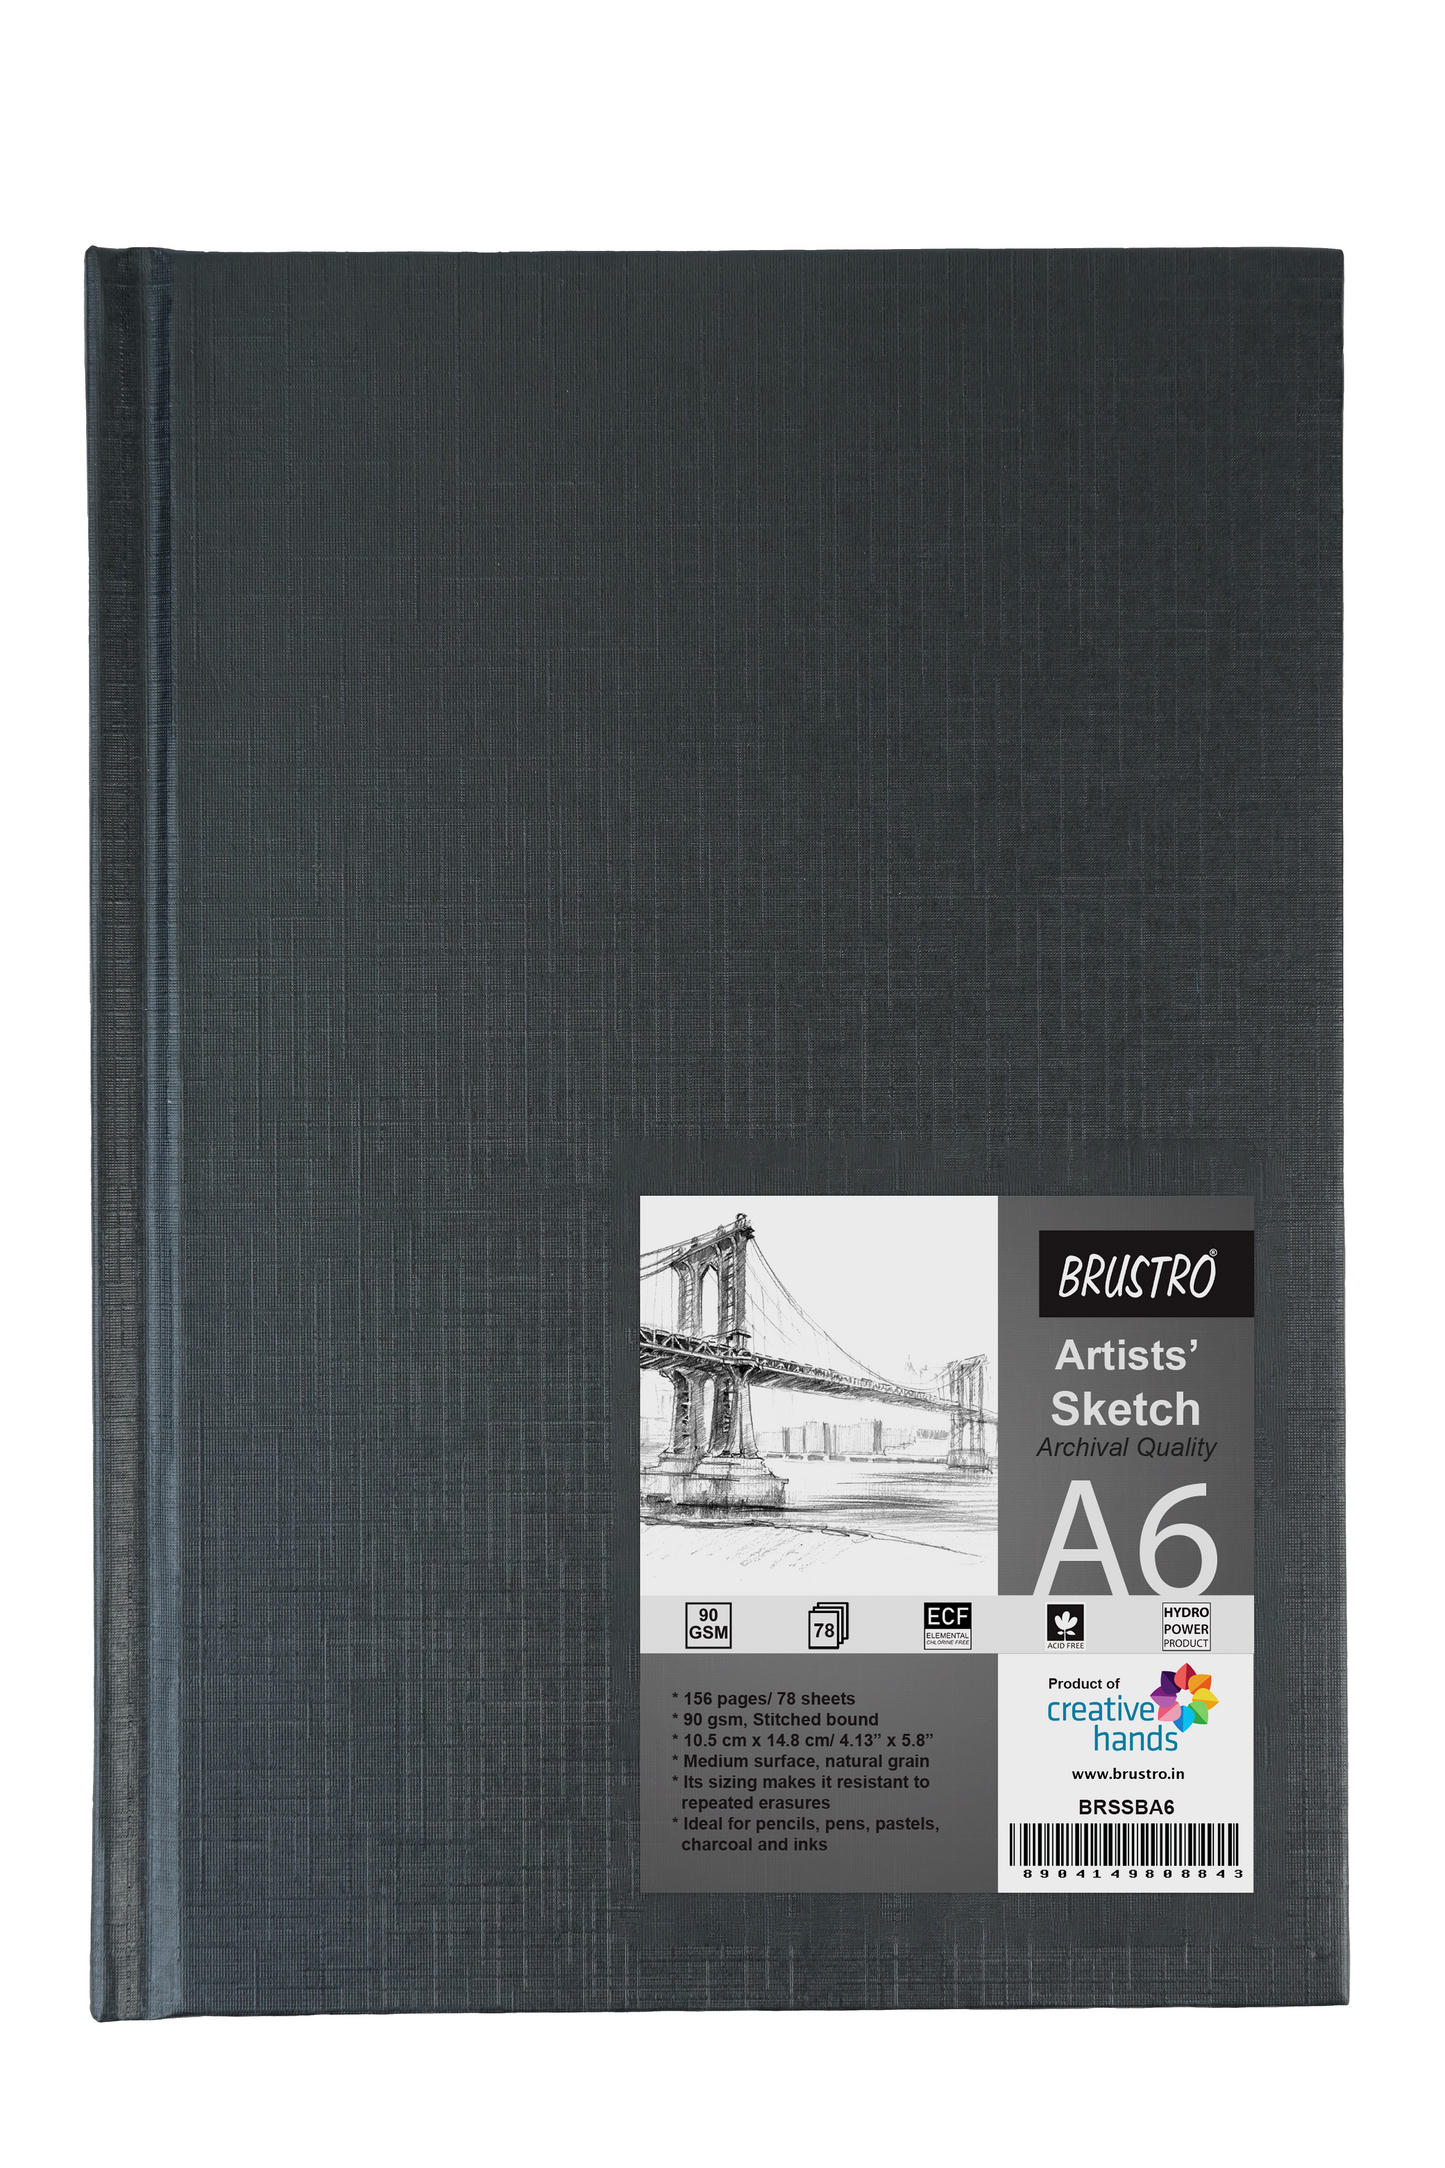 Brustro Artists Sketch Book A6 Size Stitched Bound 156 Pages 90 GSM (Acid Free)